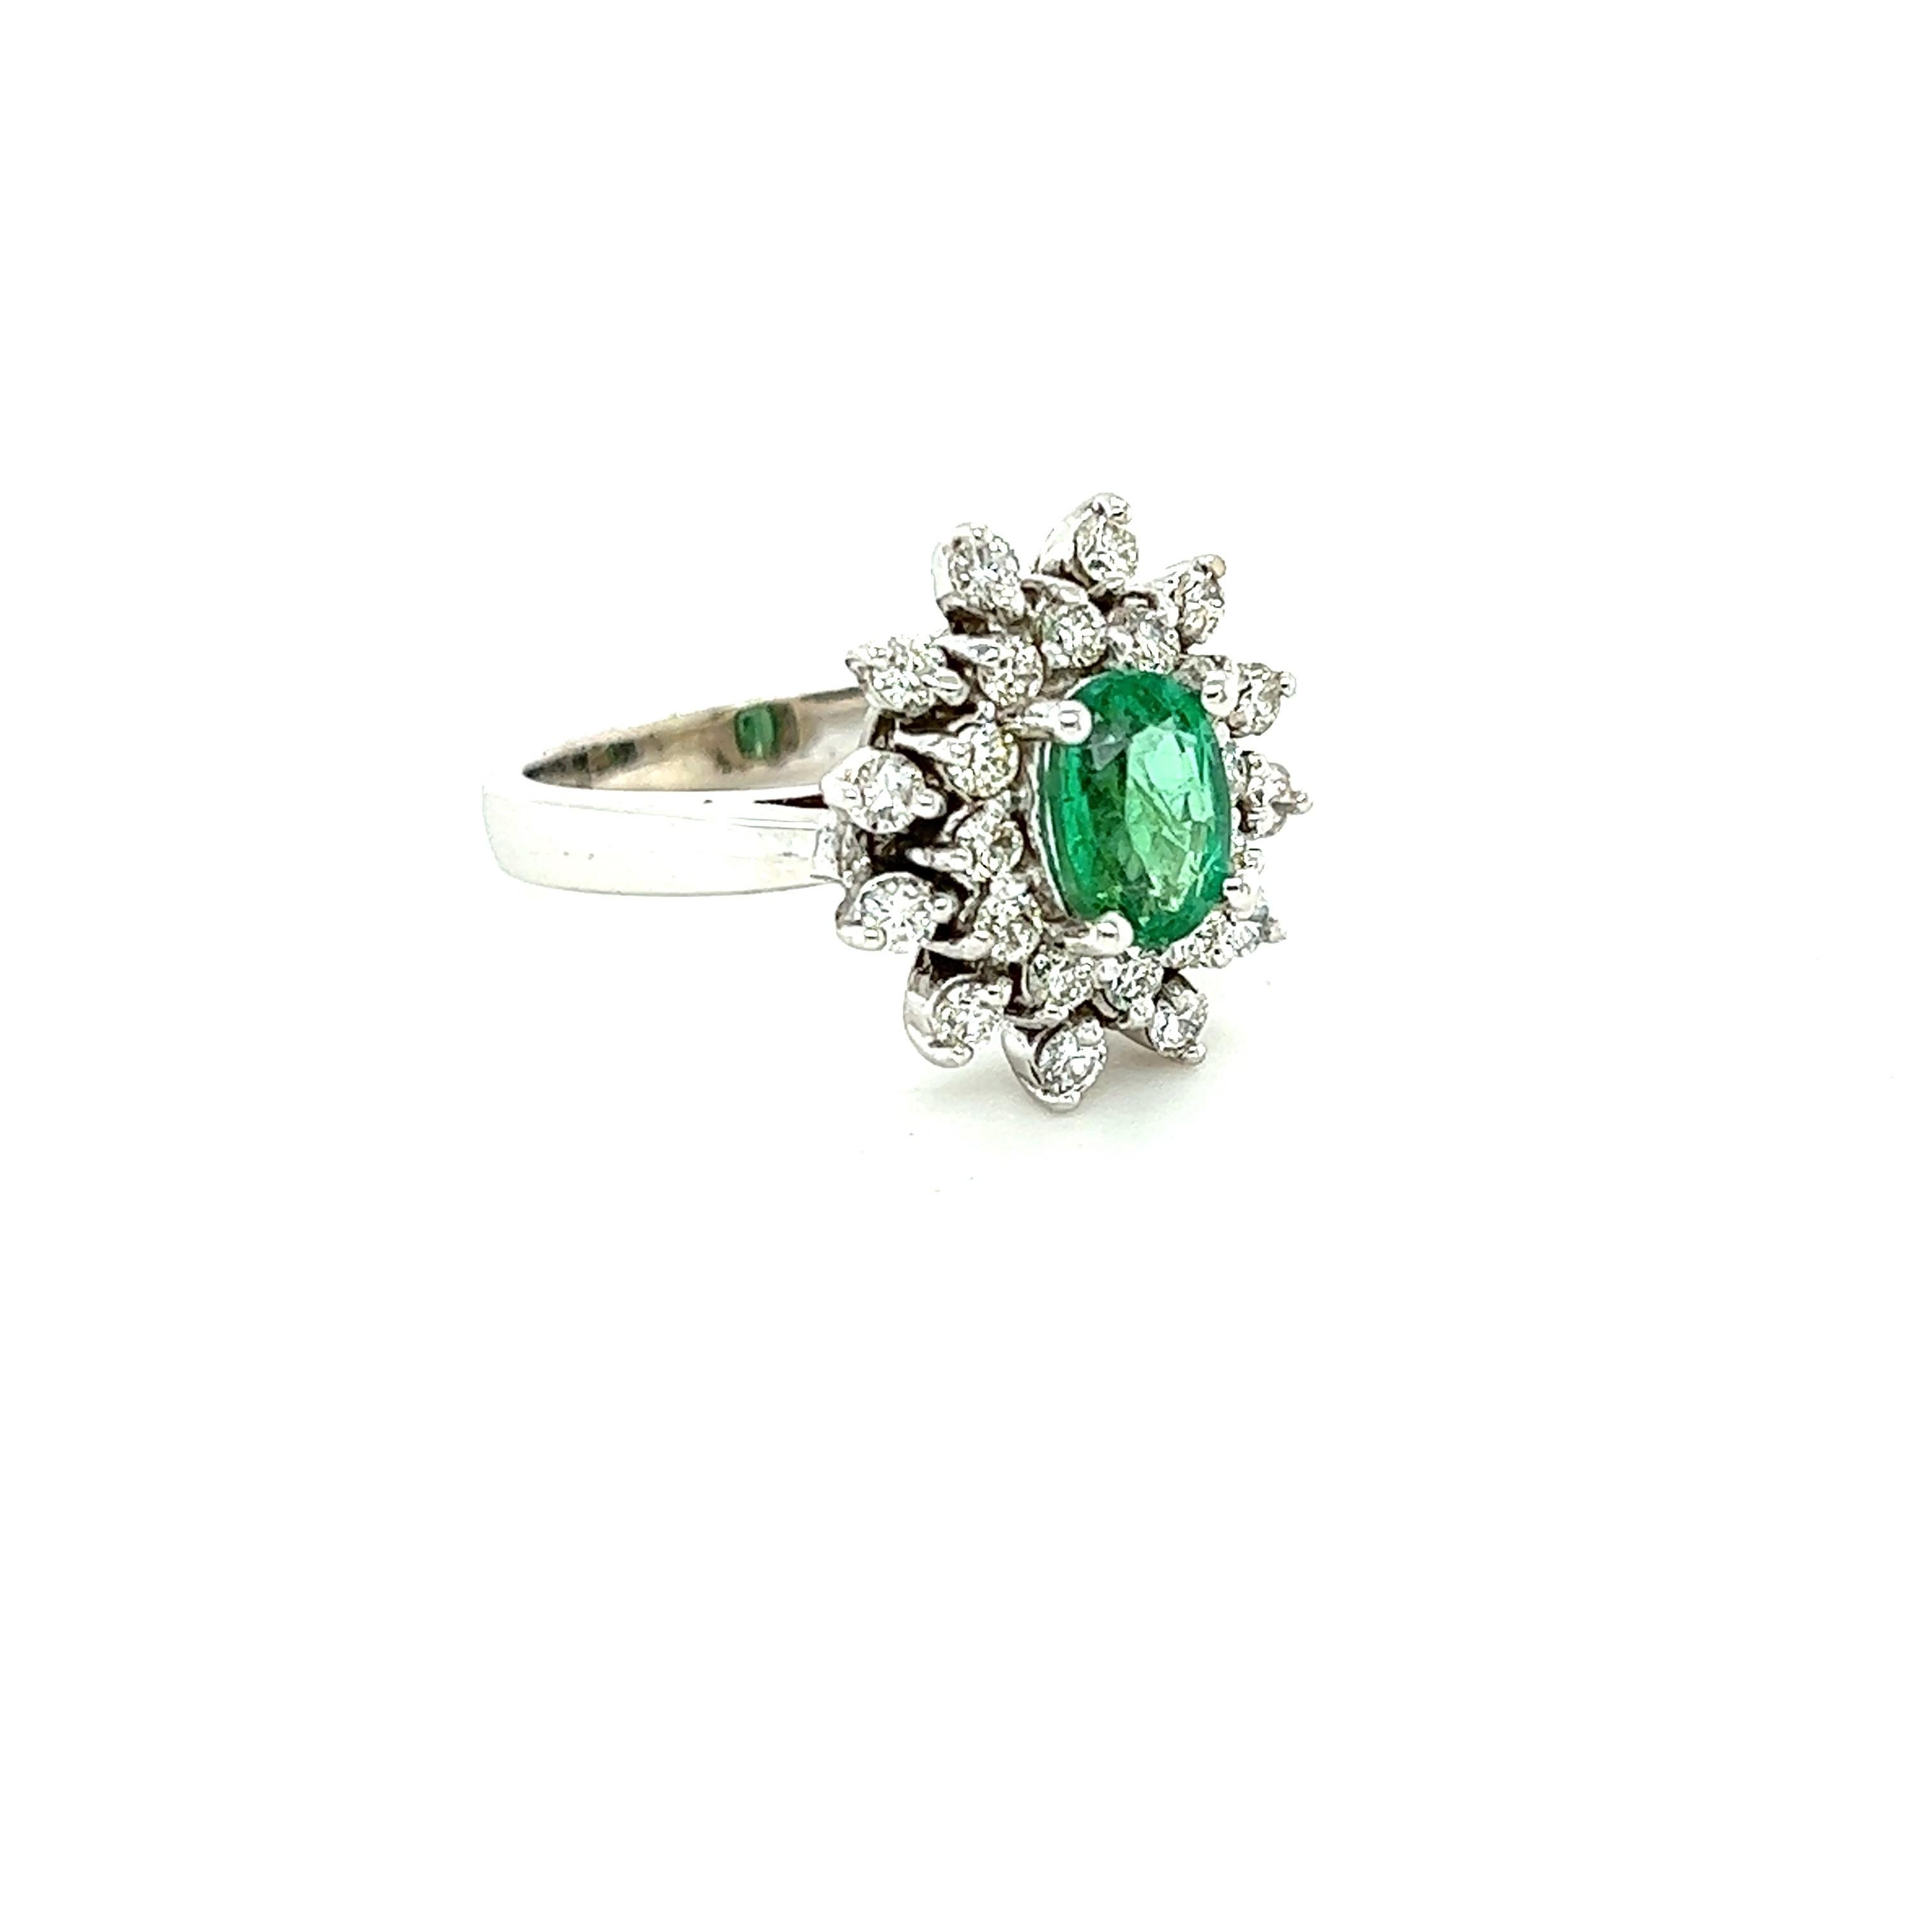 This ring has a 0.94 Carat Oval Cut Emerald and is surrounded by 24 Round Cut Diamonds that weigh 0.66 Carats. (Clarity: SI, Color: F) The total carat weight of the ring is 1.60 carats. 
The Oval Cut Emerald measures at approximately 7 mm x 5 mm.